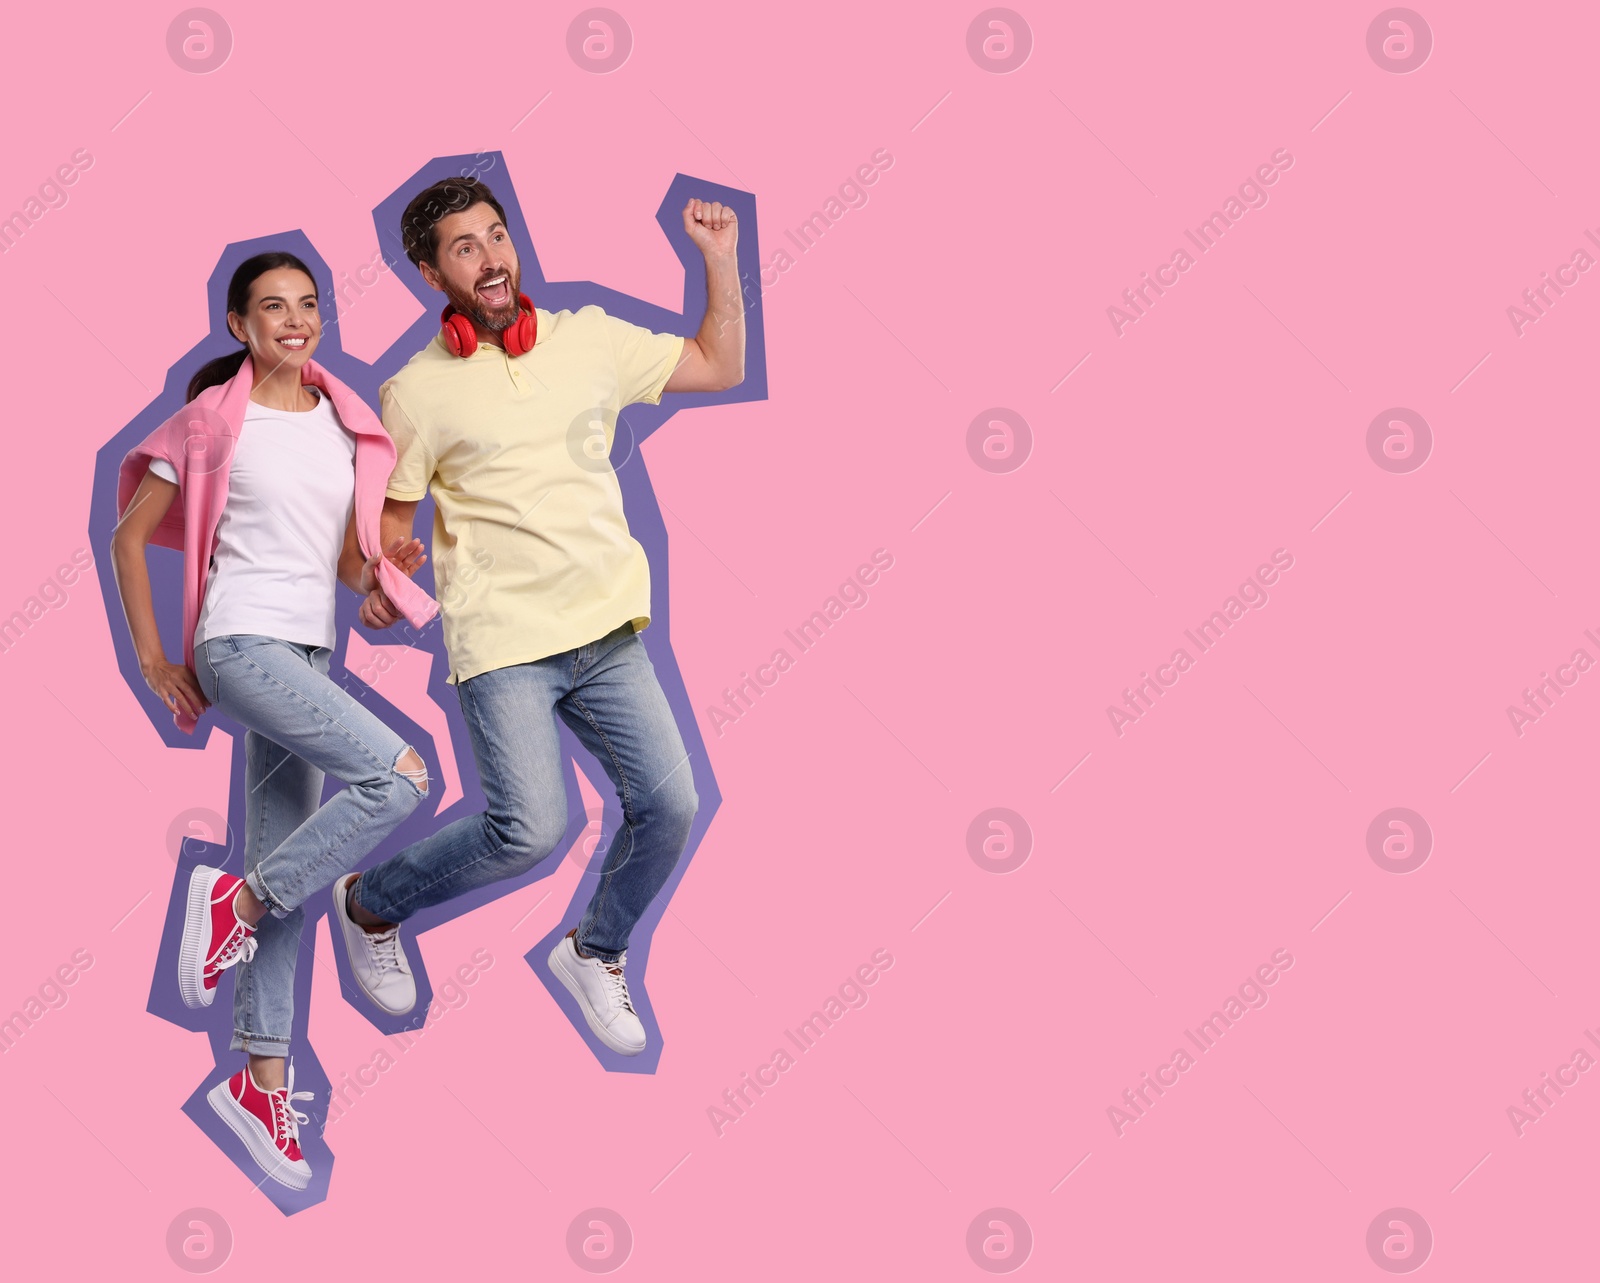 Image of Pop art poster. Happy couple dancing together on pink background. Space for text